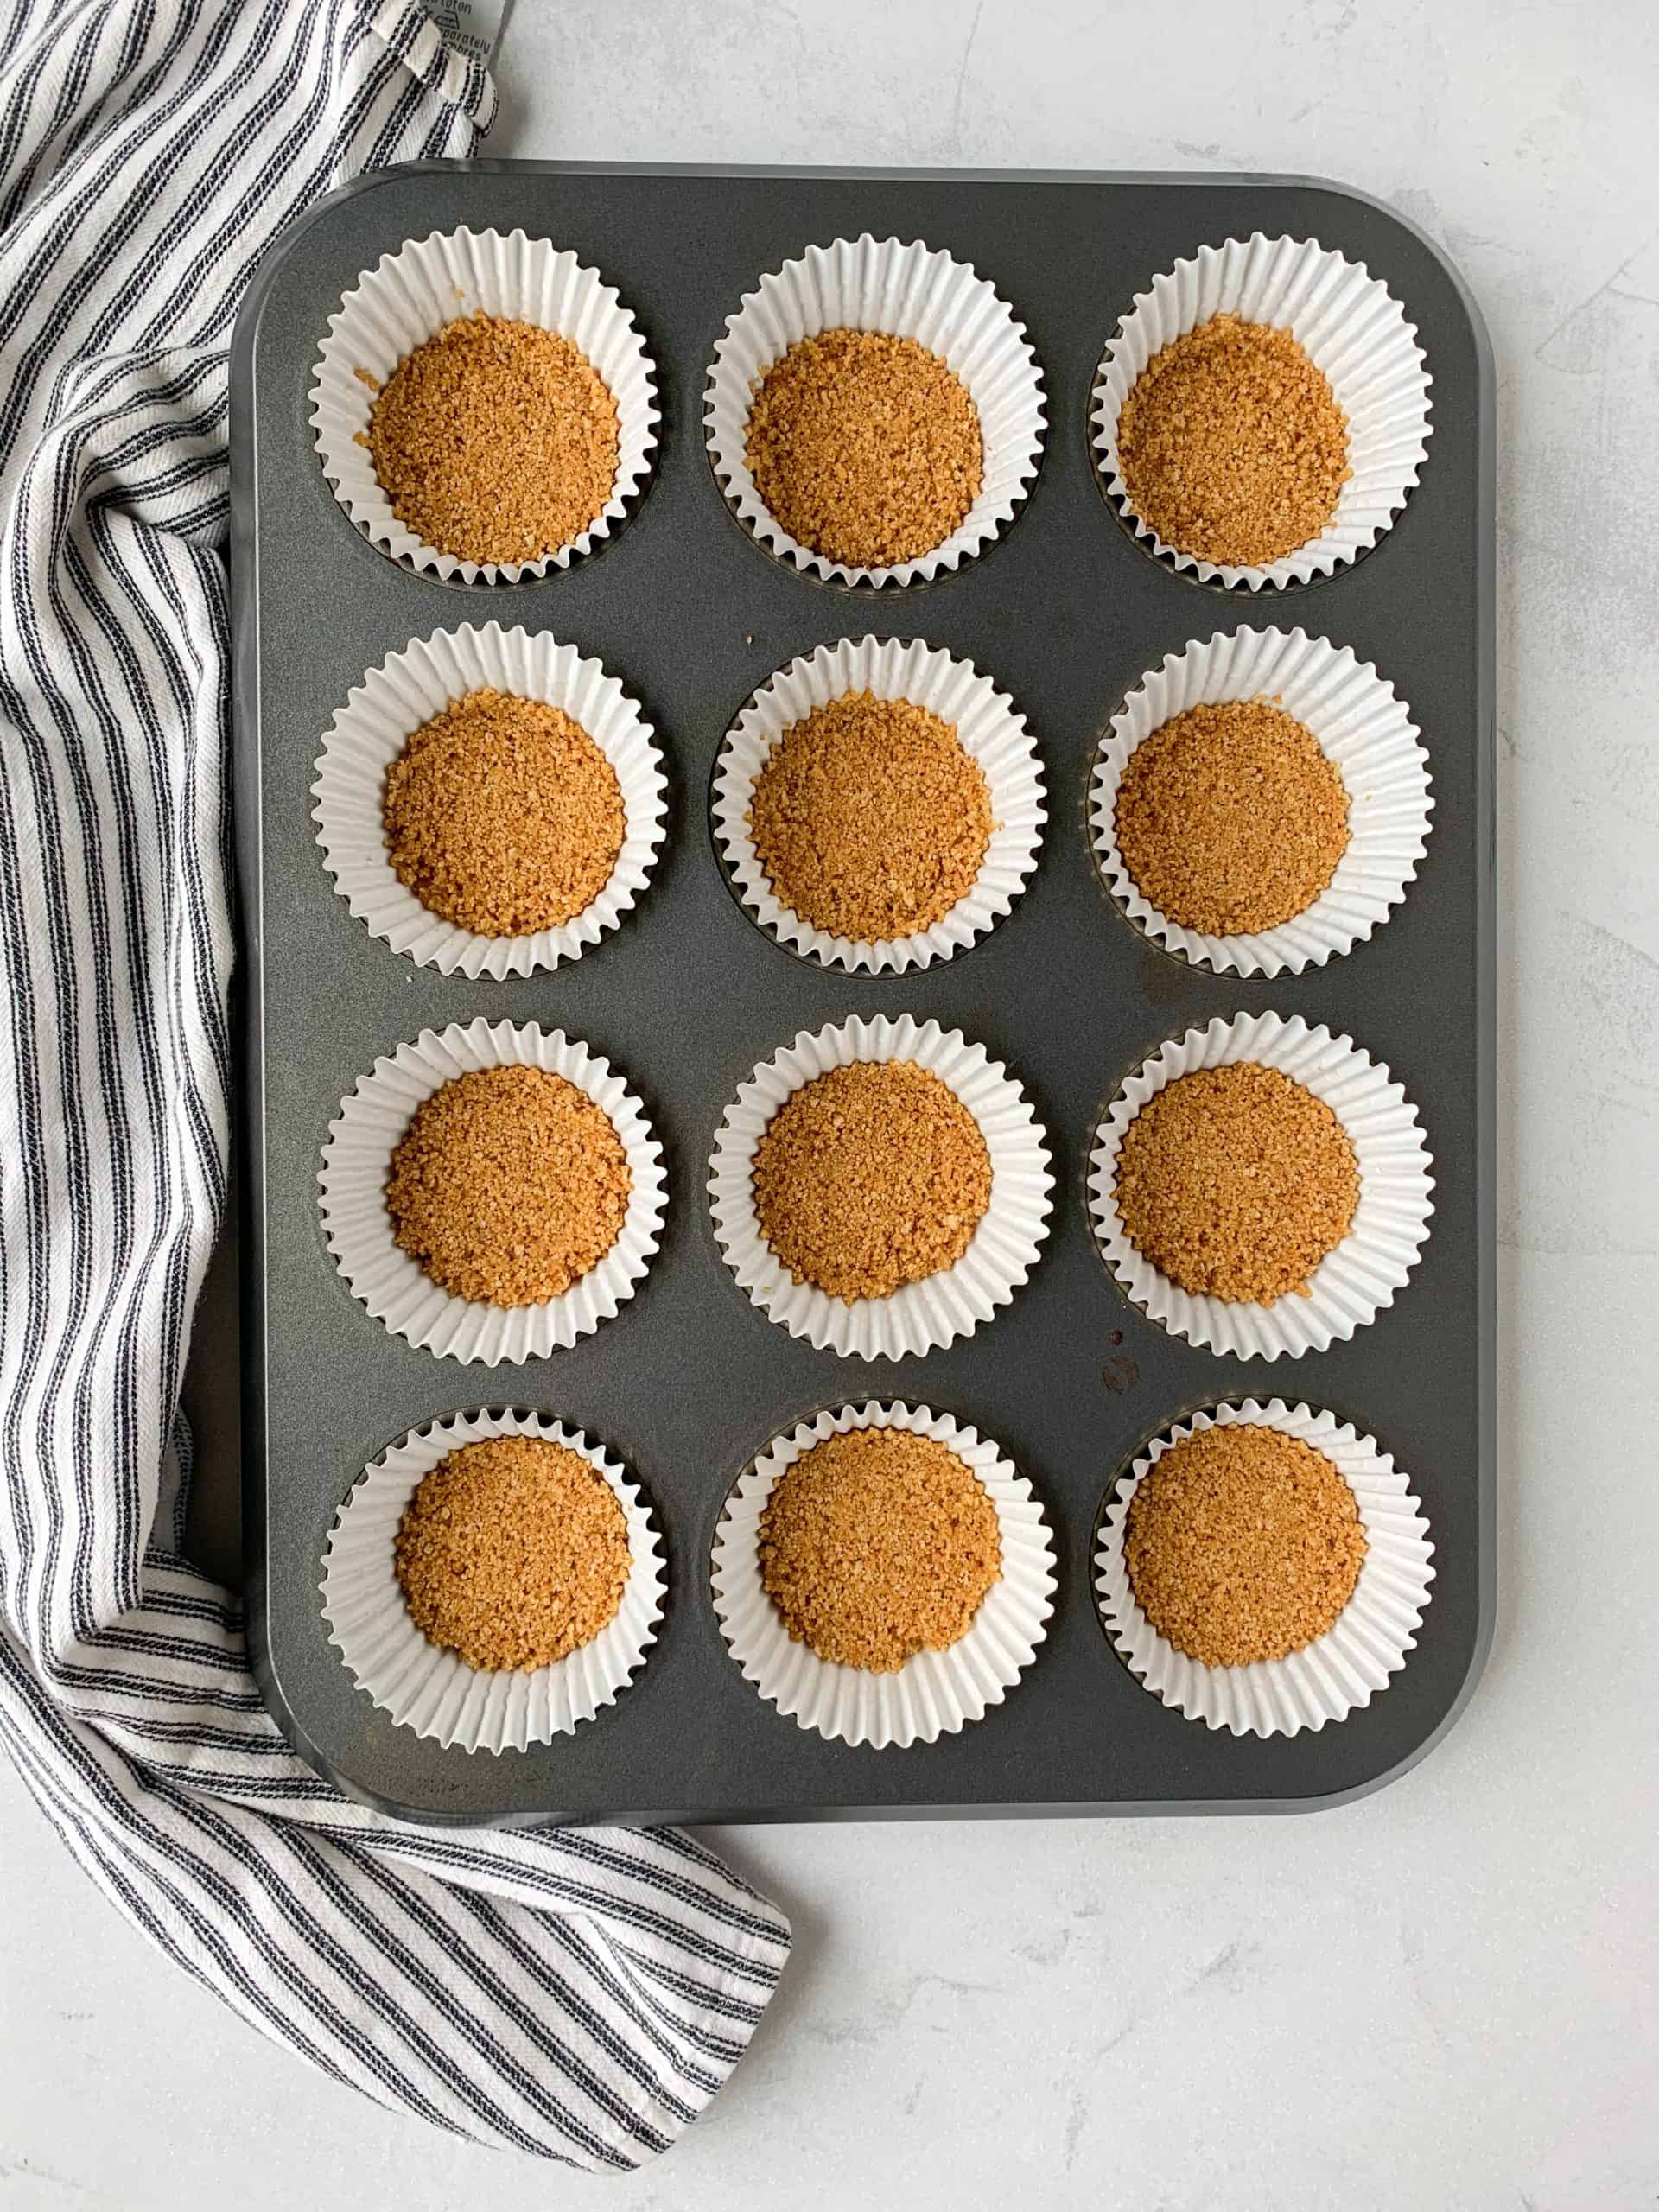 twelve cupcake paper liners filled with a graham cracker crust.